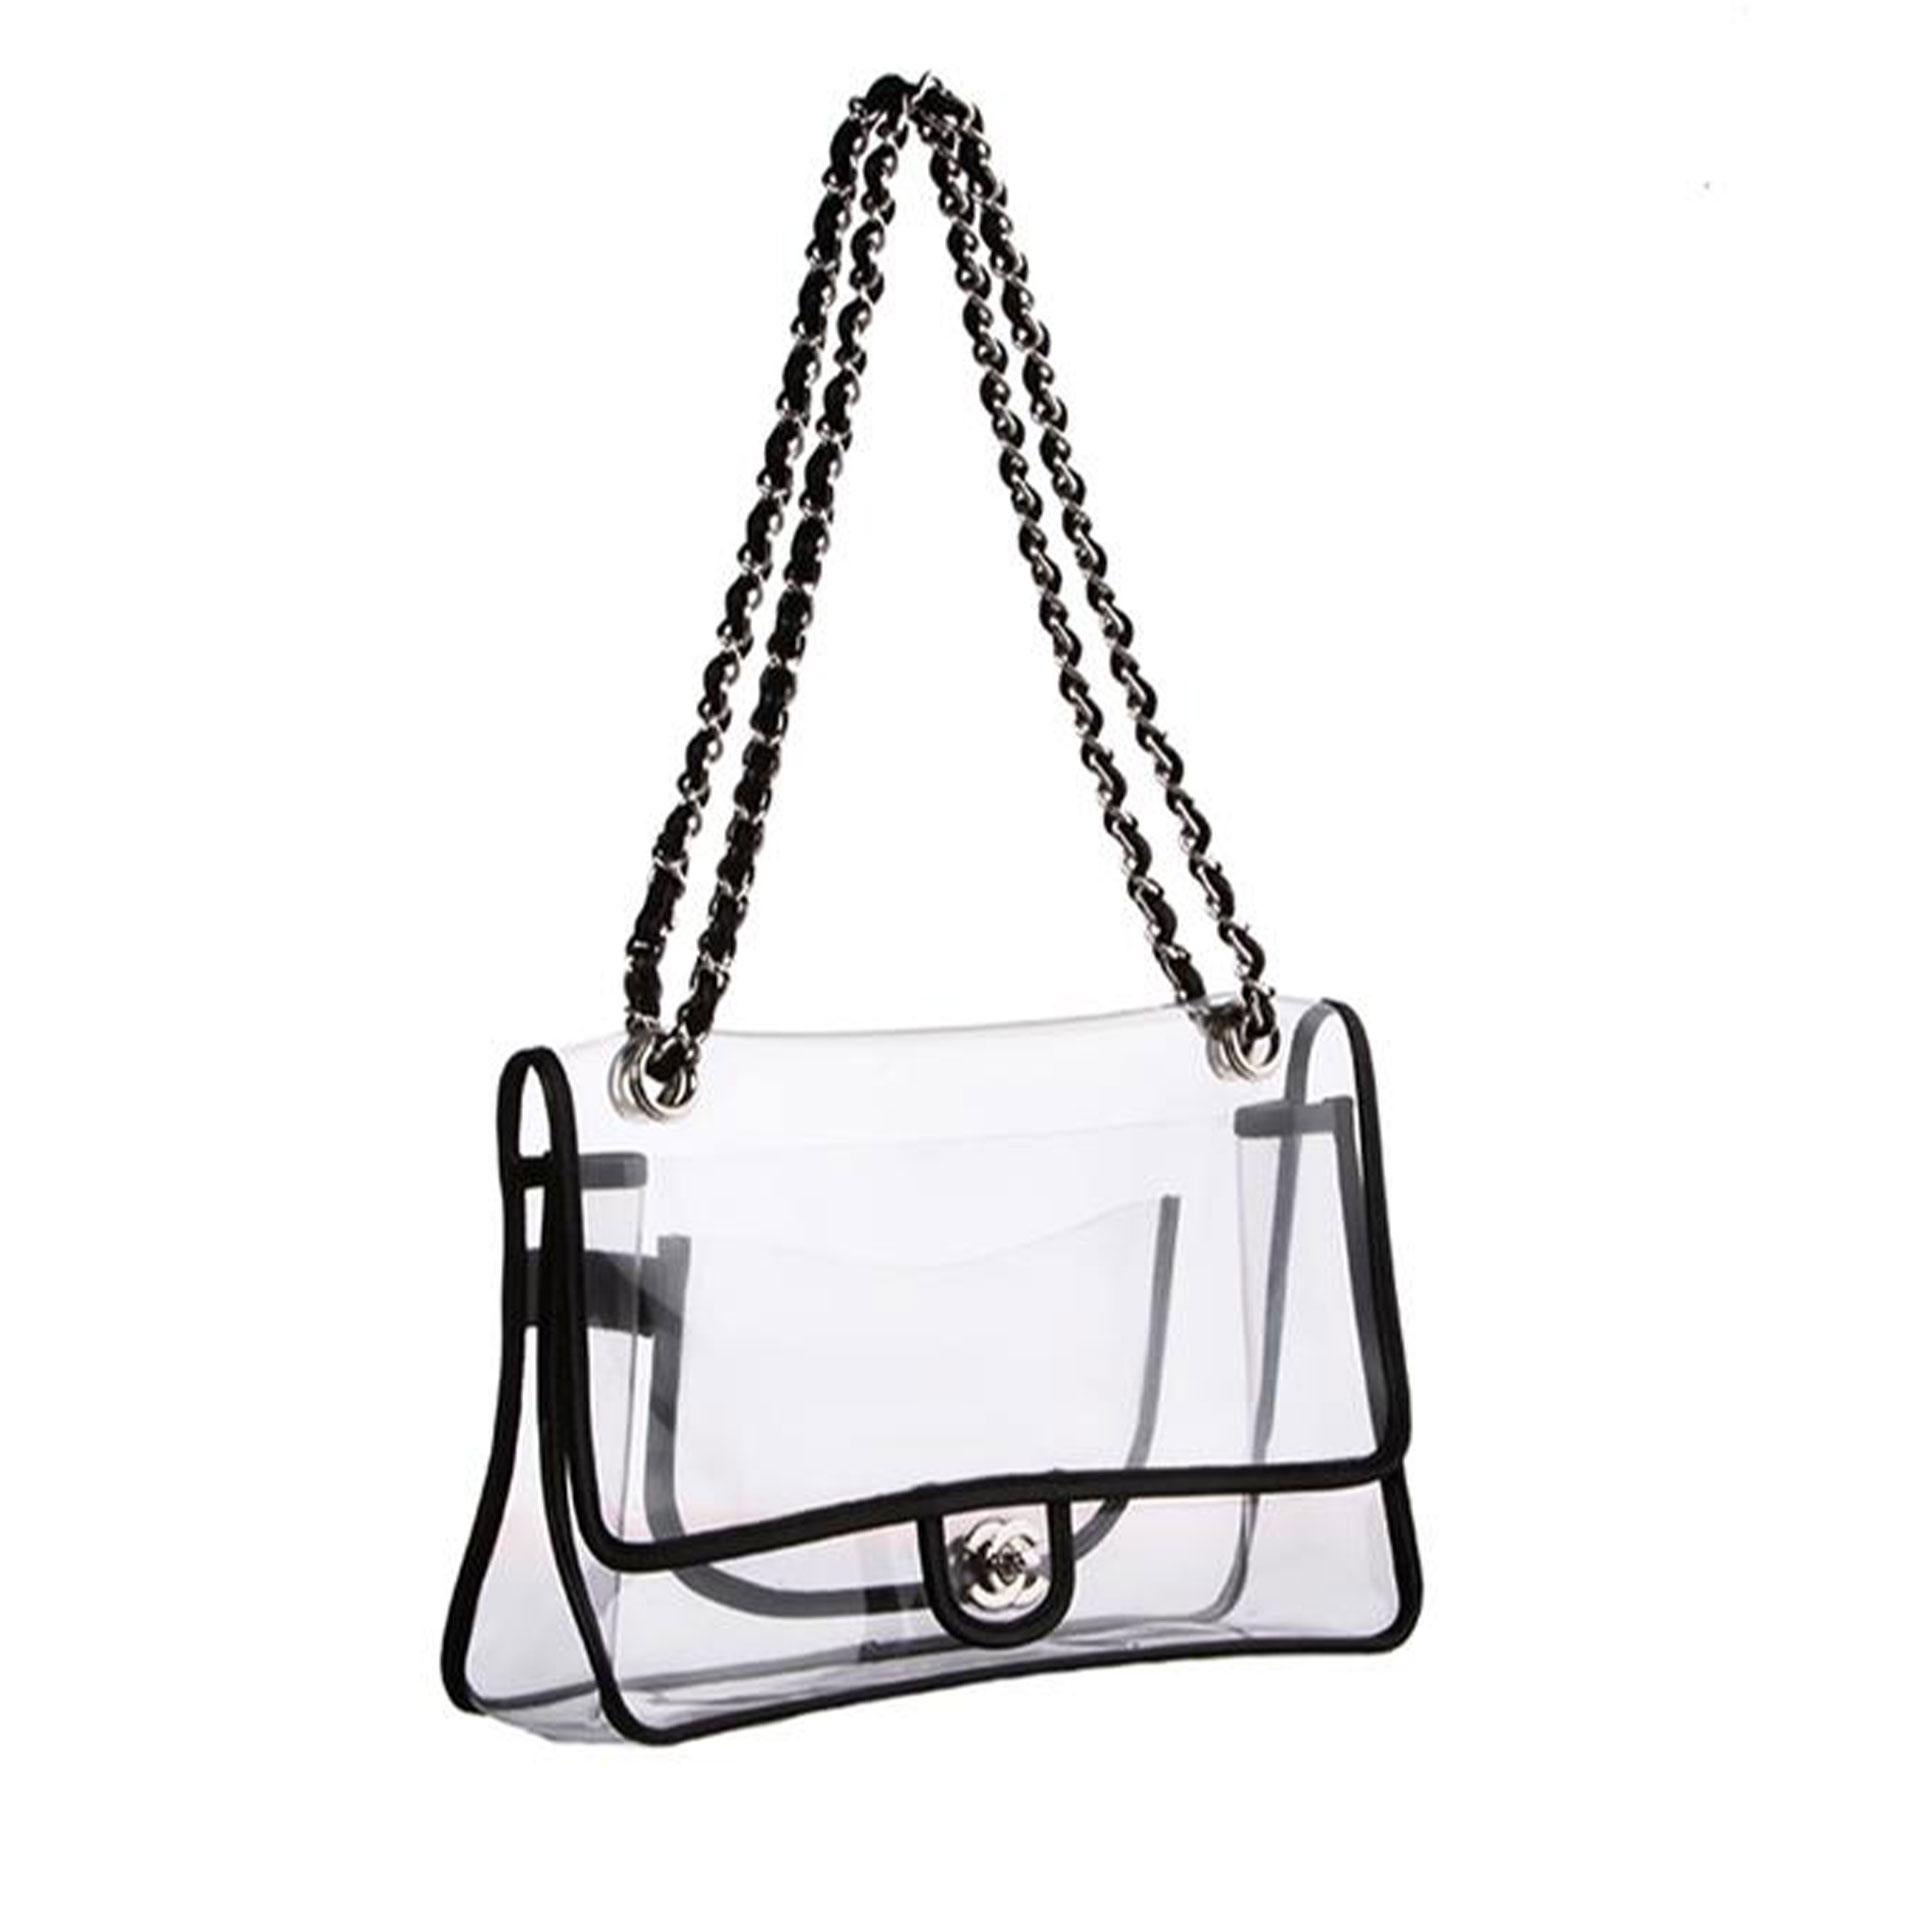 Chanel Transparent Classic 2.55 Flap Vintage Clear Naked Flap

Chanel Transparent Classic Medium Flap Bag with black lambskin piping. Features Chanel interwoven black lambskin chain that can be worn on the shoulder single (25.5